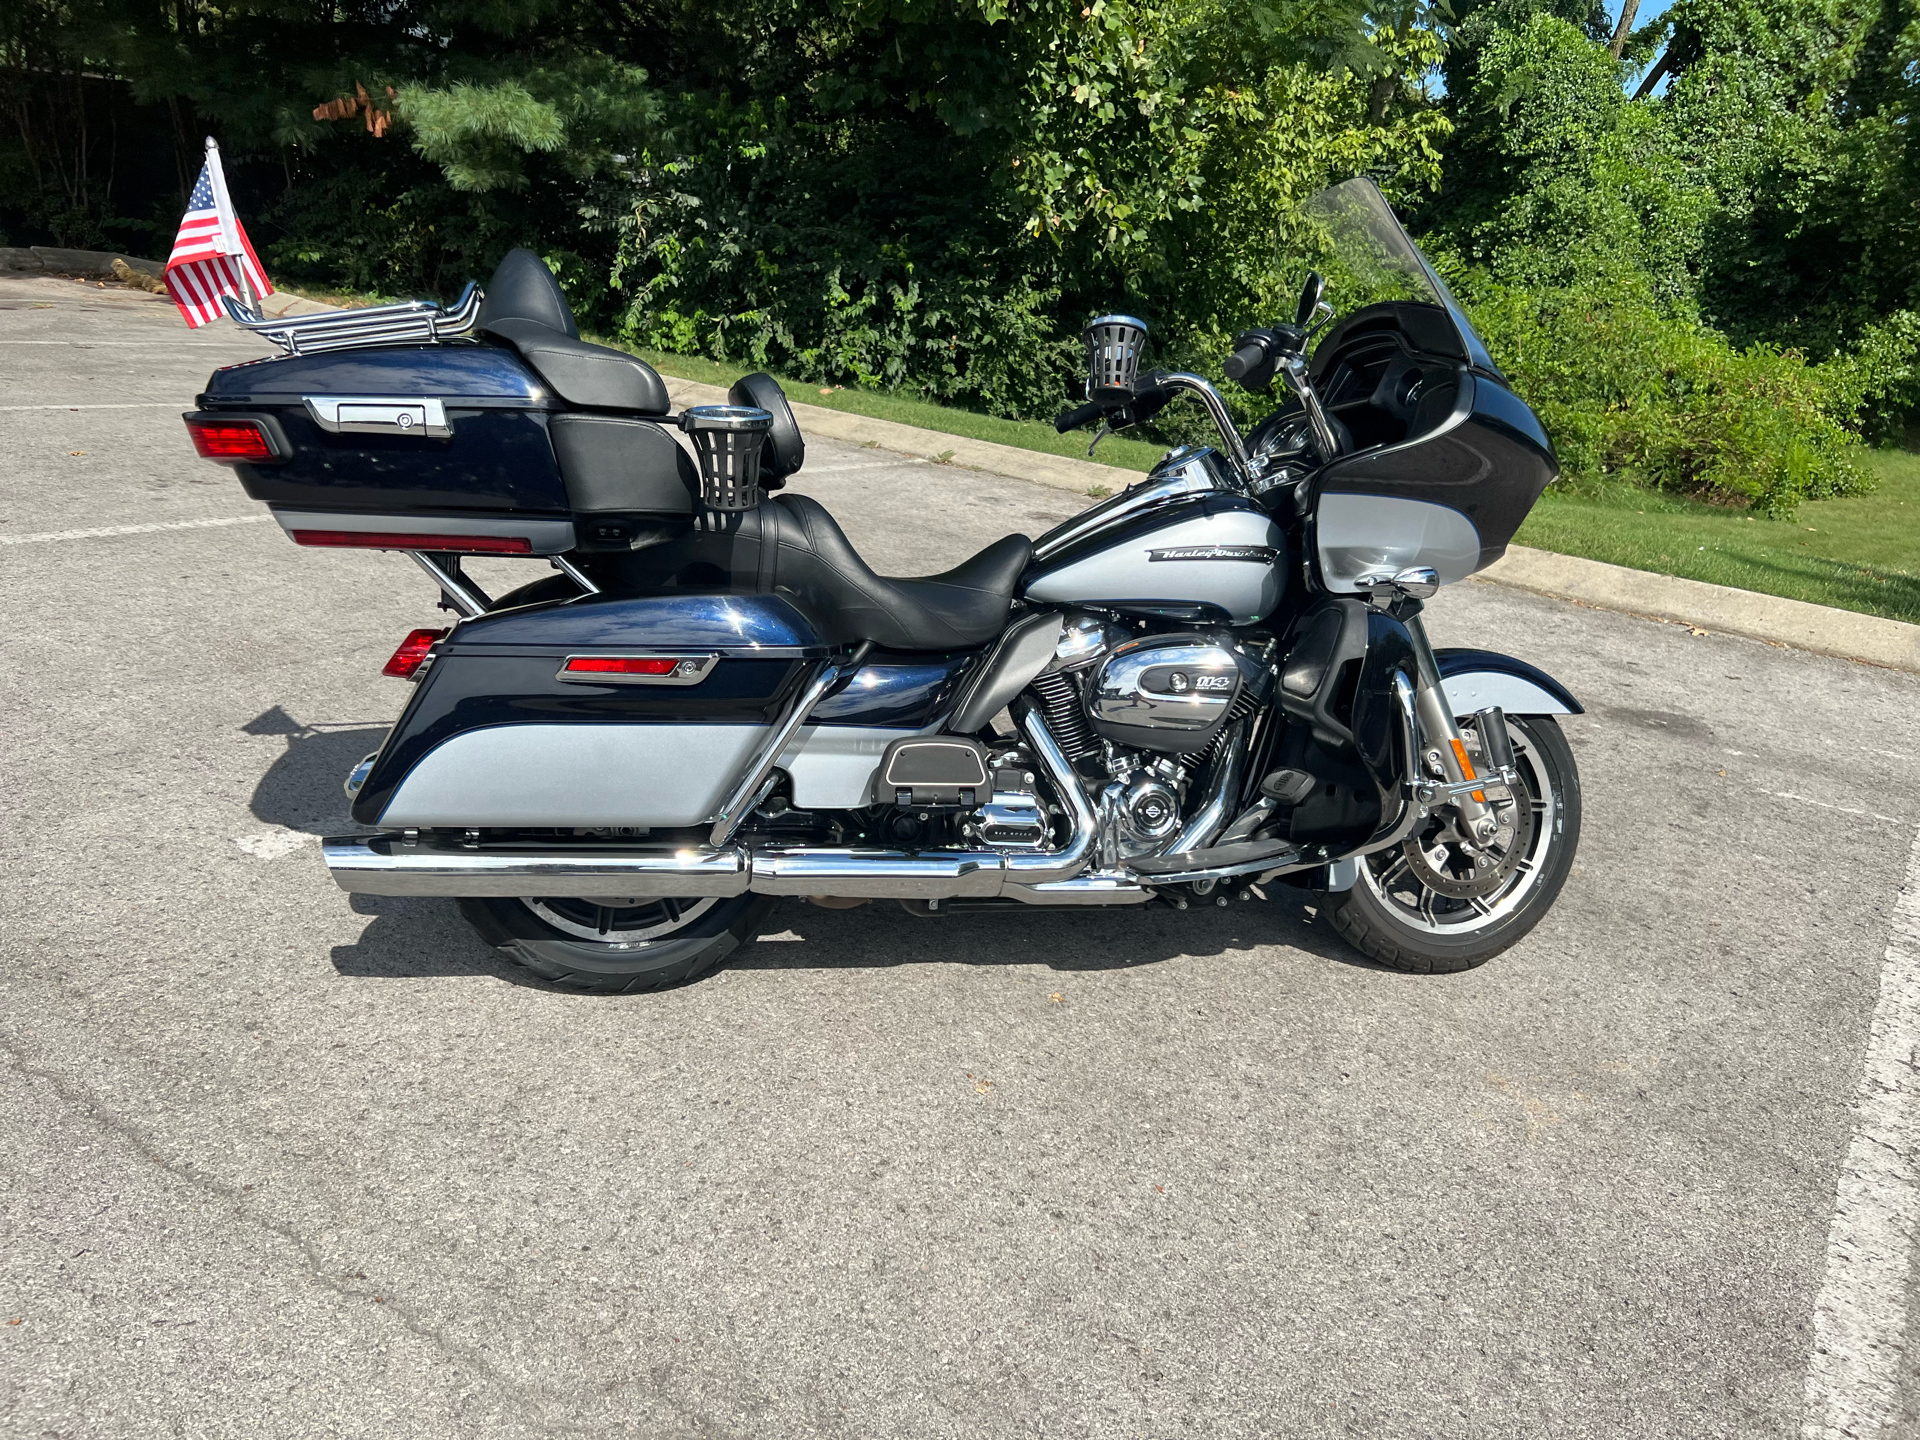 2019 Harley-Davidson Road Glide® Ultra in Franklin, Tennessee - Photo 9